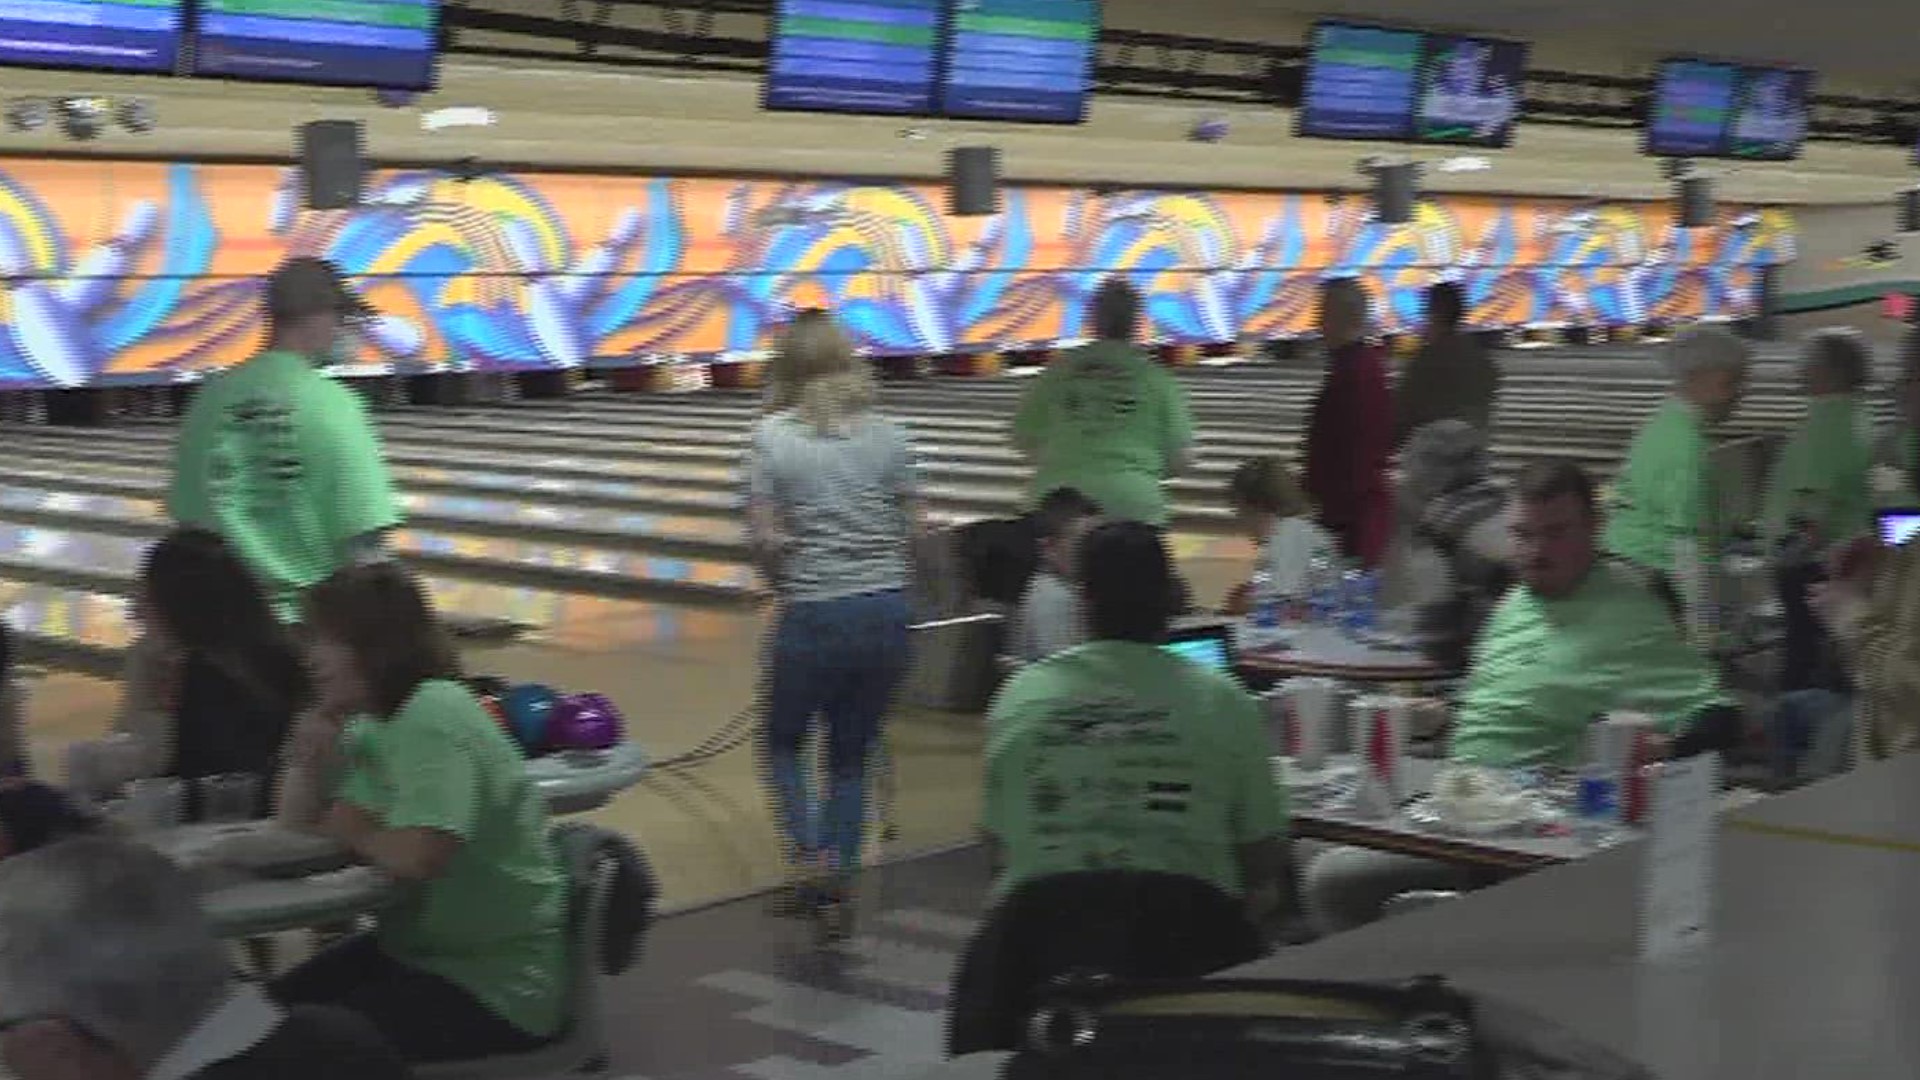 The 20th annual event on Feb. 27 at ABC West Bowling benefited the West Shore "Sertoma" club, which supports local charities and scholarships.